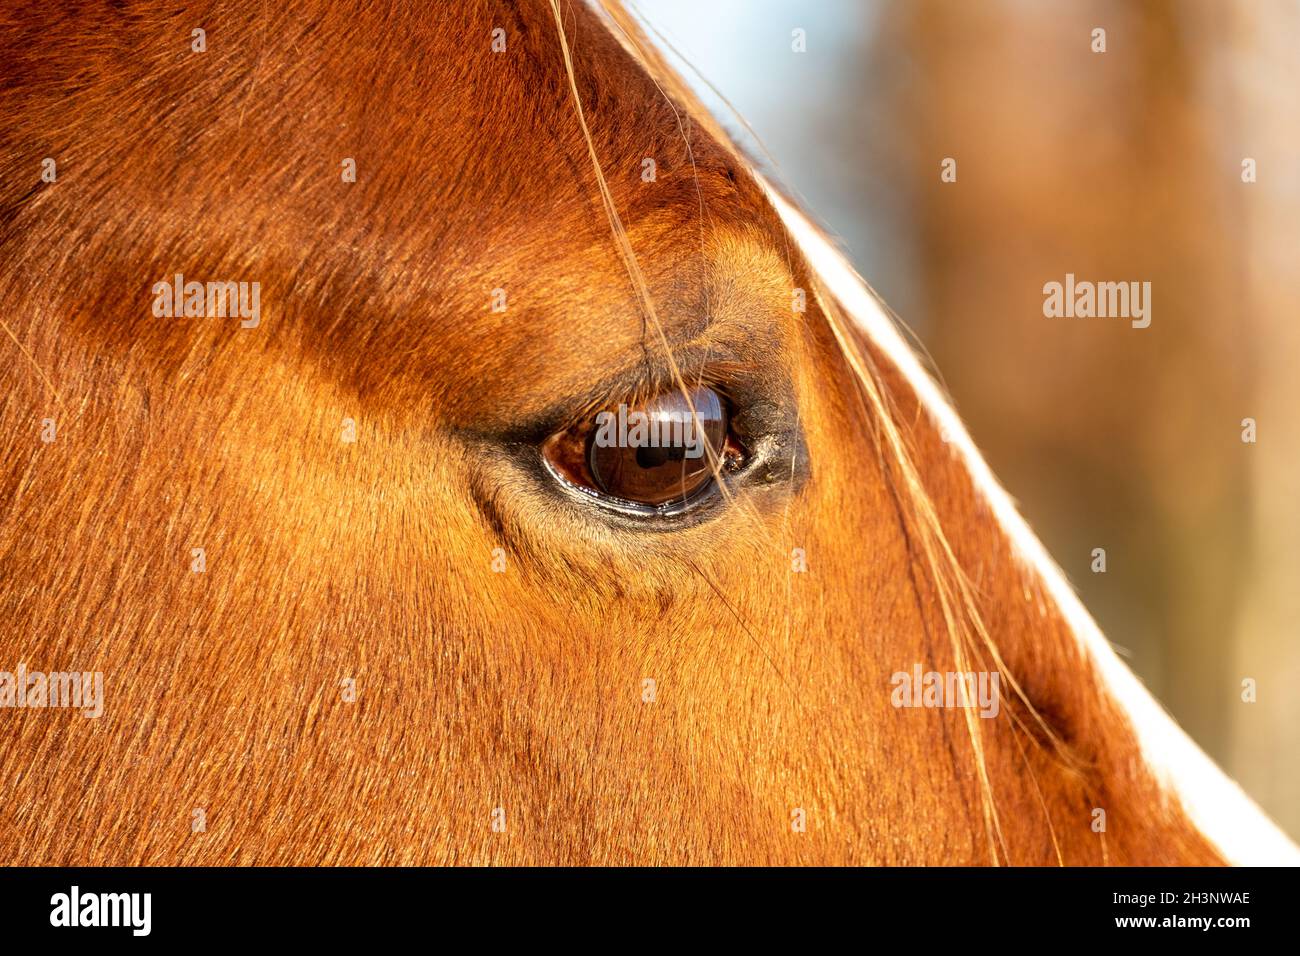 A Horse Portrait Focusing on a Single Brown Eye Stock Photo